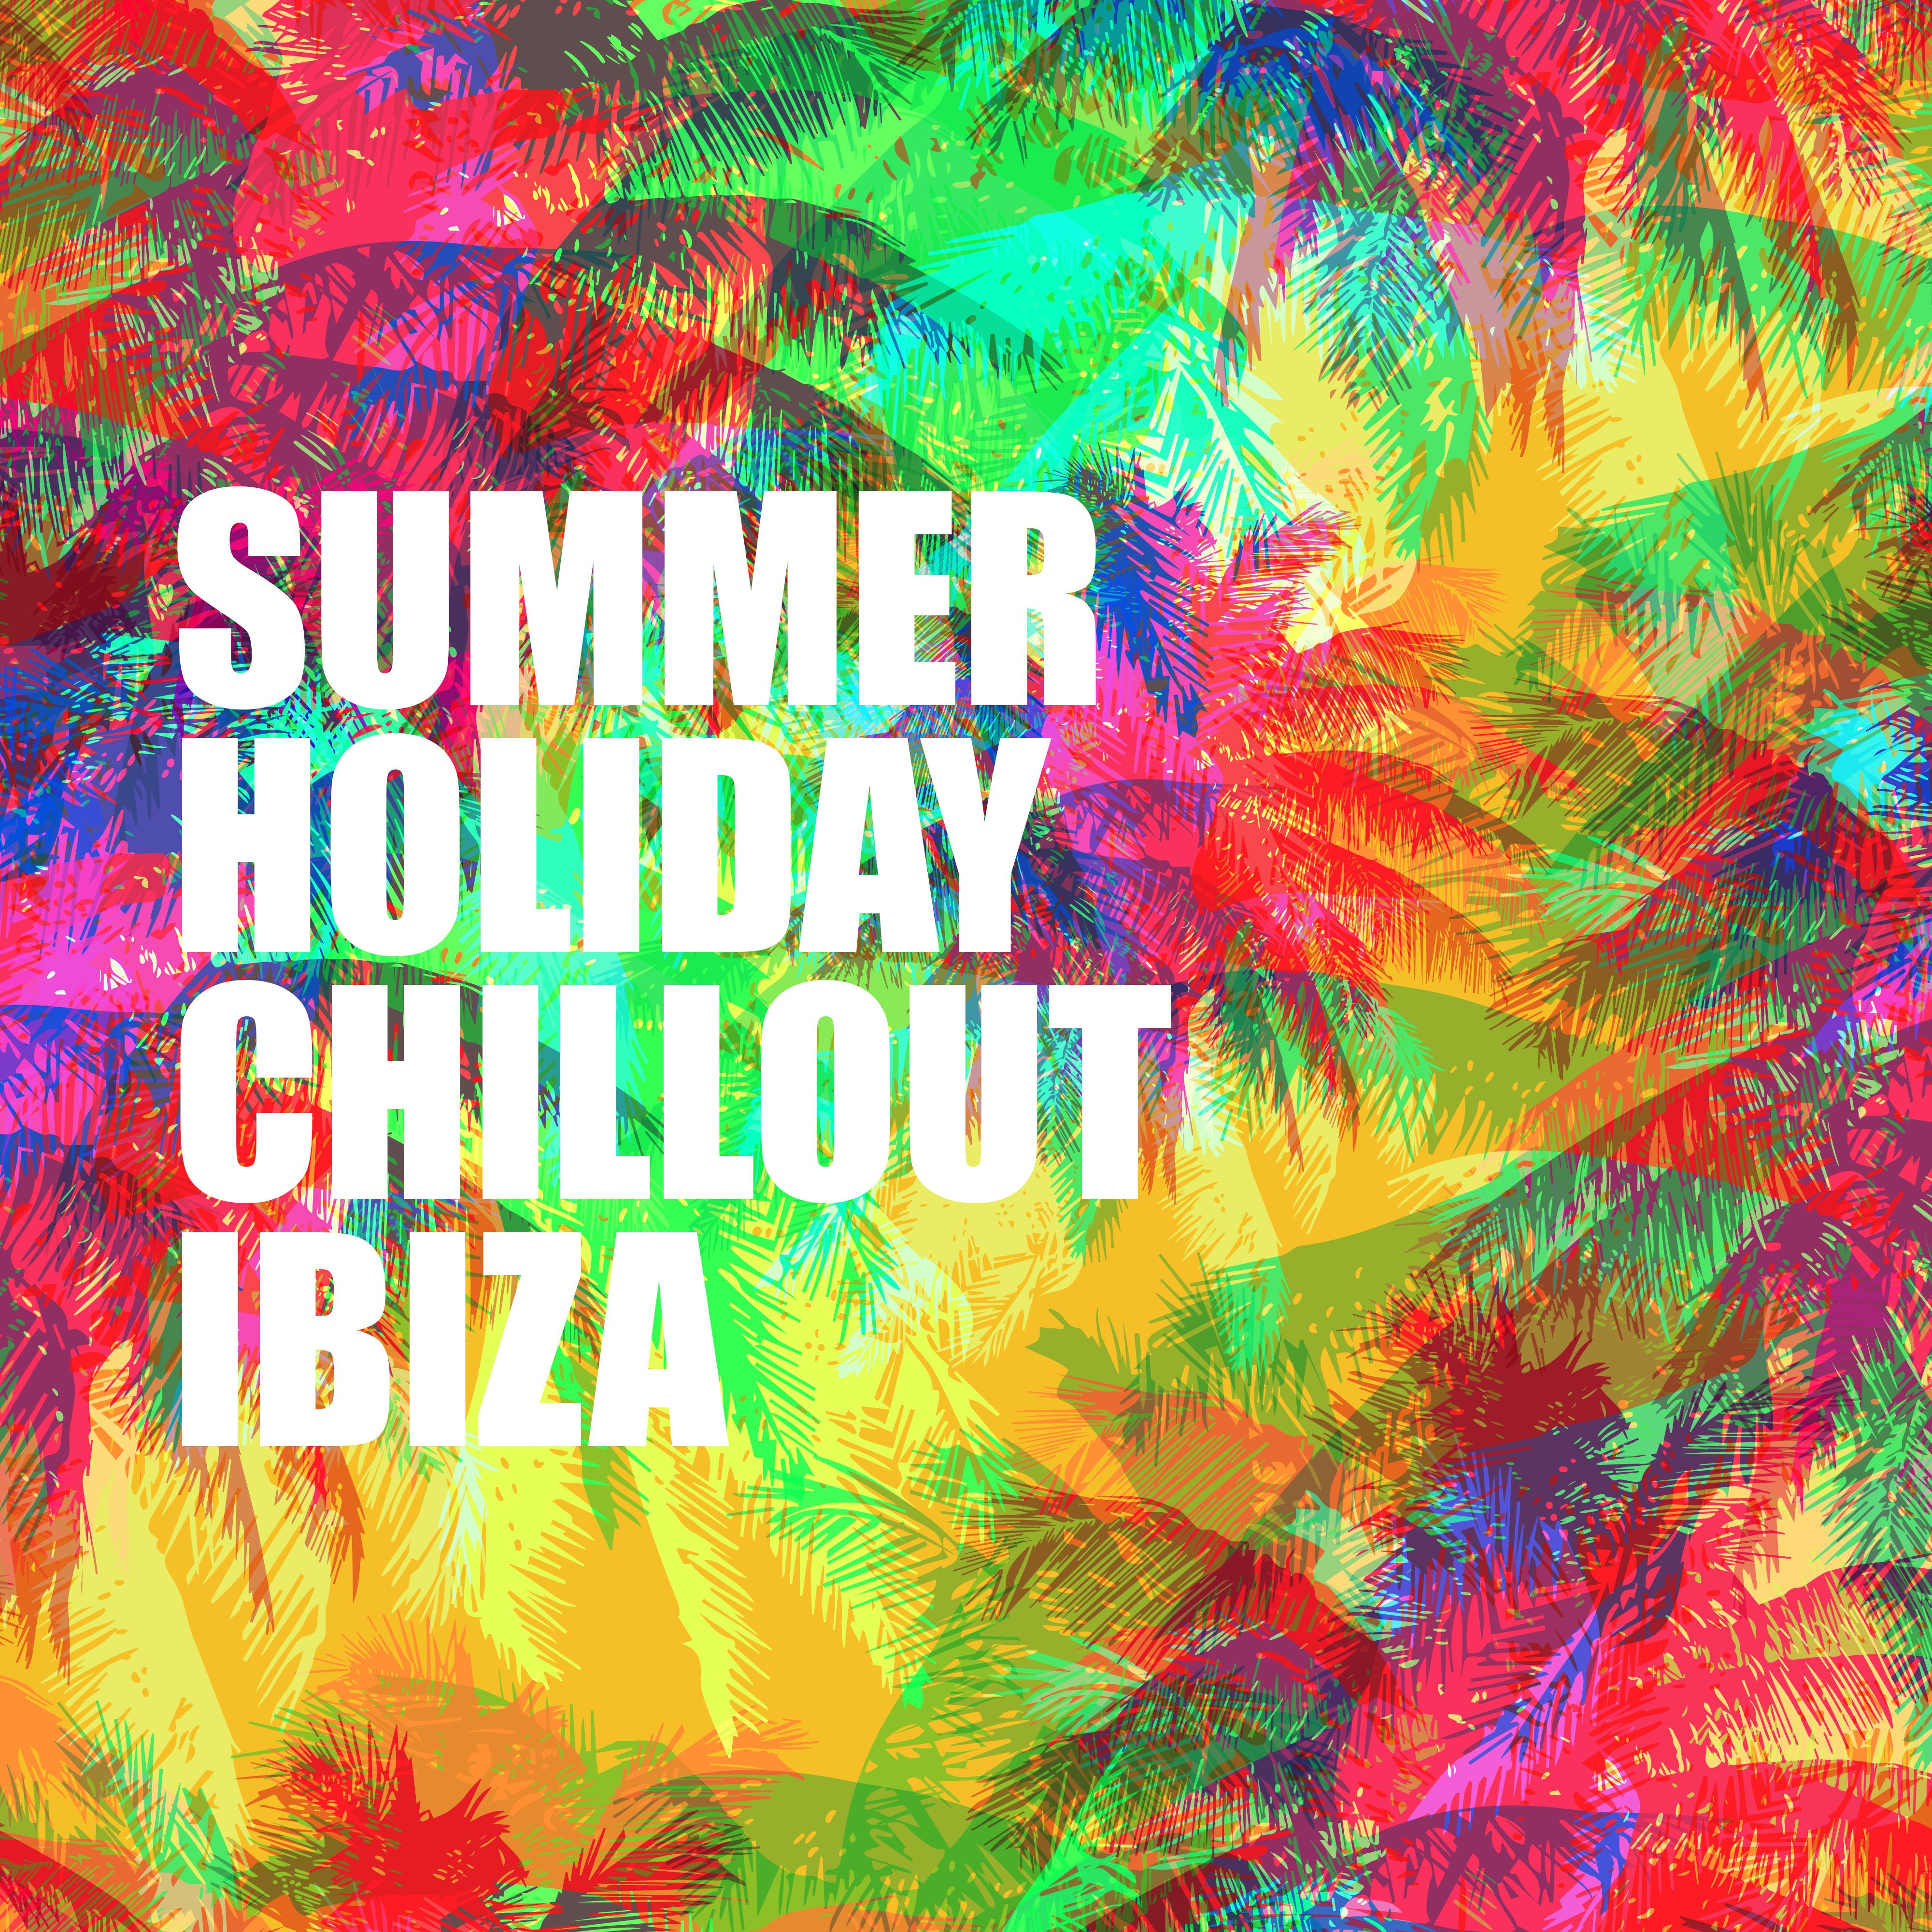 Summer Holiday Chillout Ibiza: Compilation of Best 2019 Chill Out Soothing Music, Perfect Relax Under the Palms, Hotel Lounge Sounds, Beach Calming Down, Stress Relief Vibes